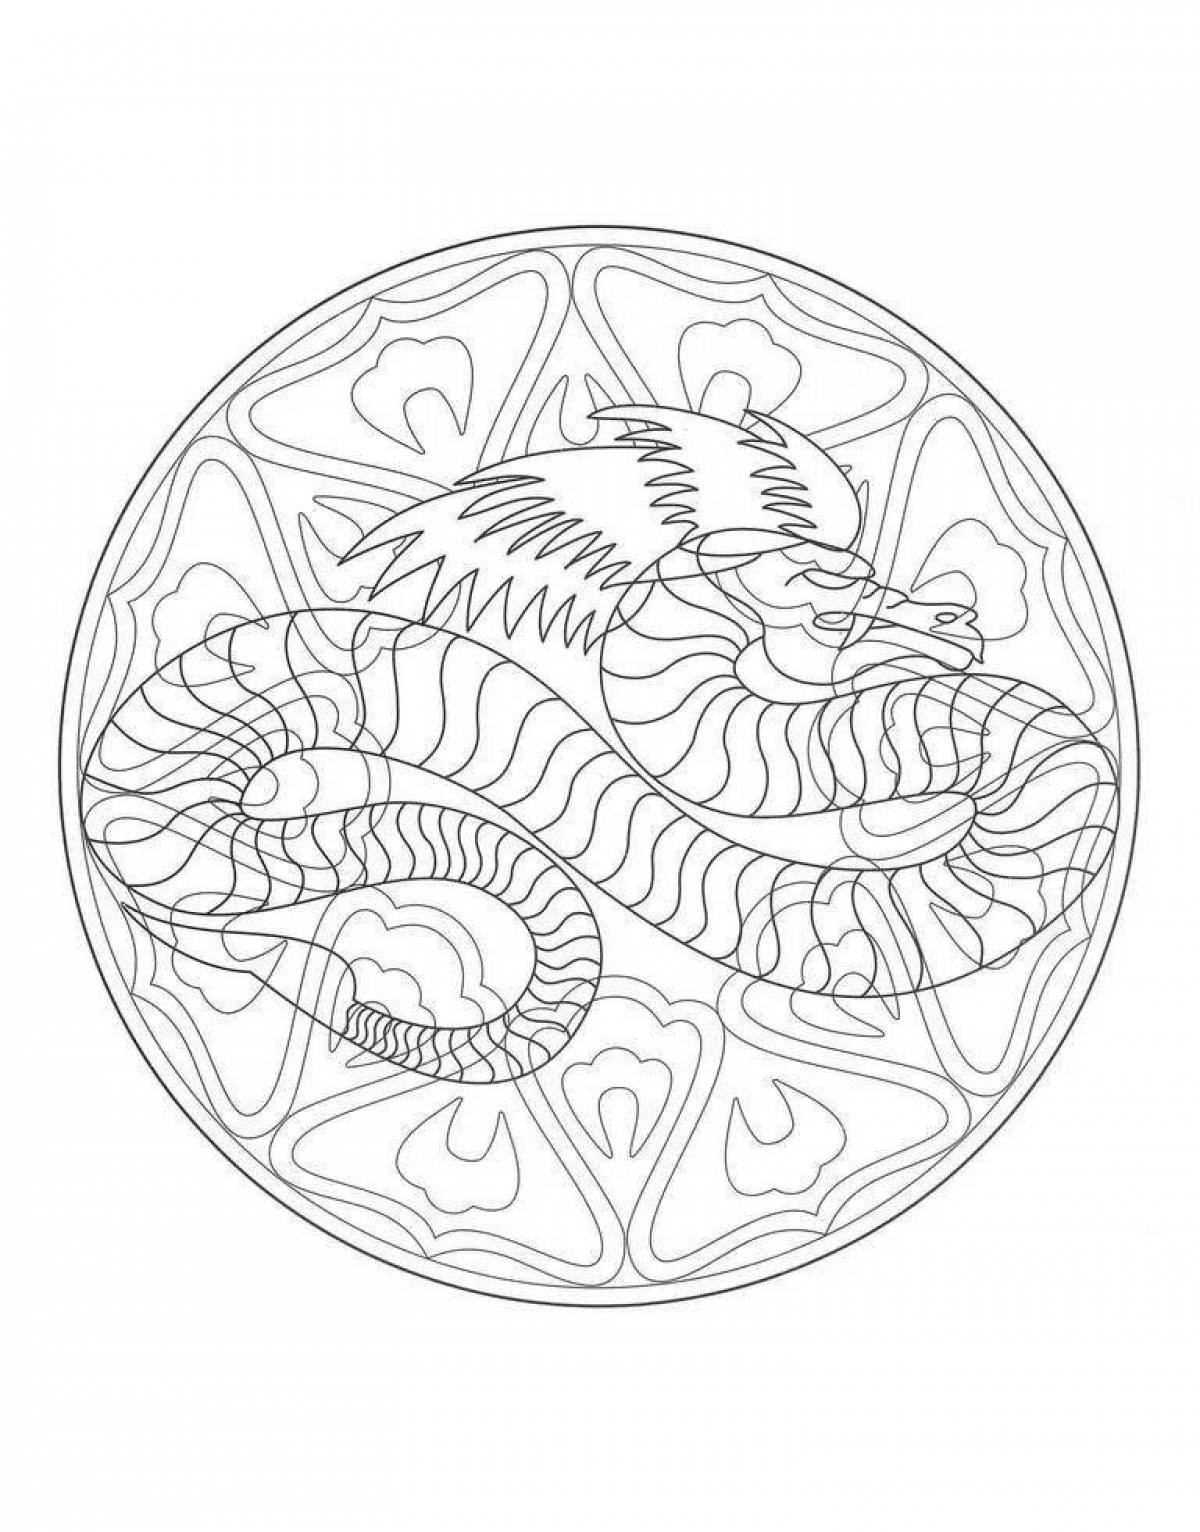 Mysterious animal spiral coloring page